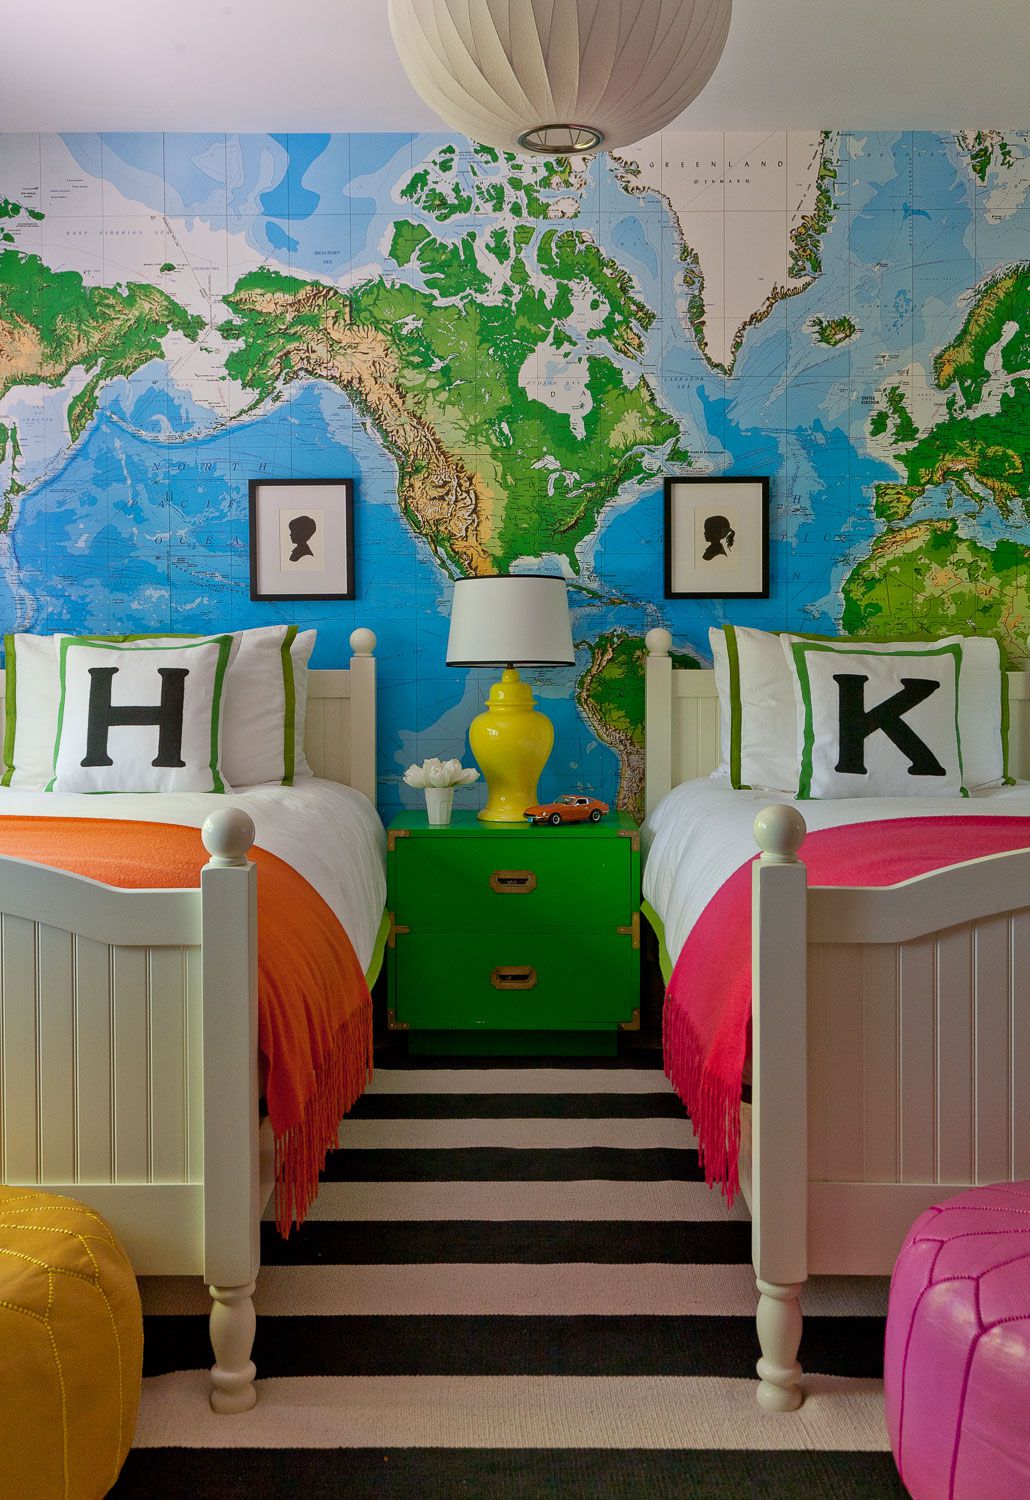 25 Cool Kids' Room Ideas - How to Decorate a Child's Bedroom